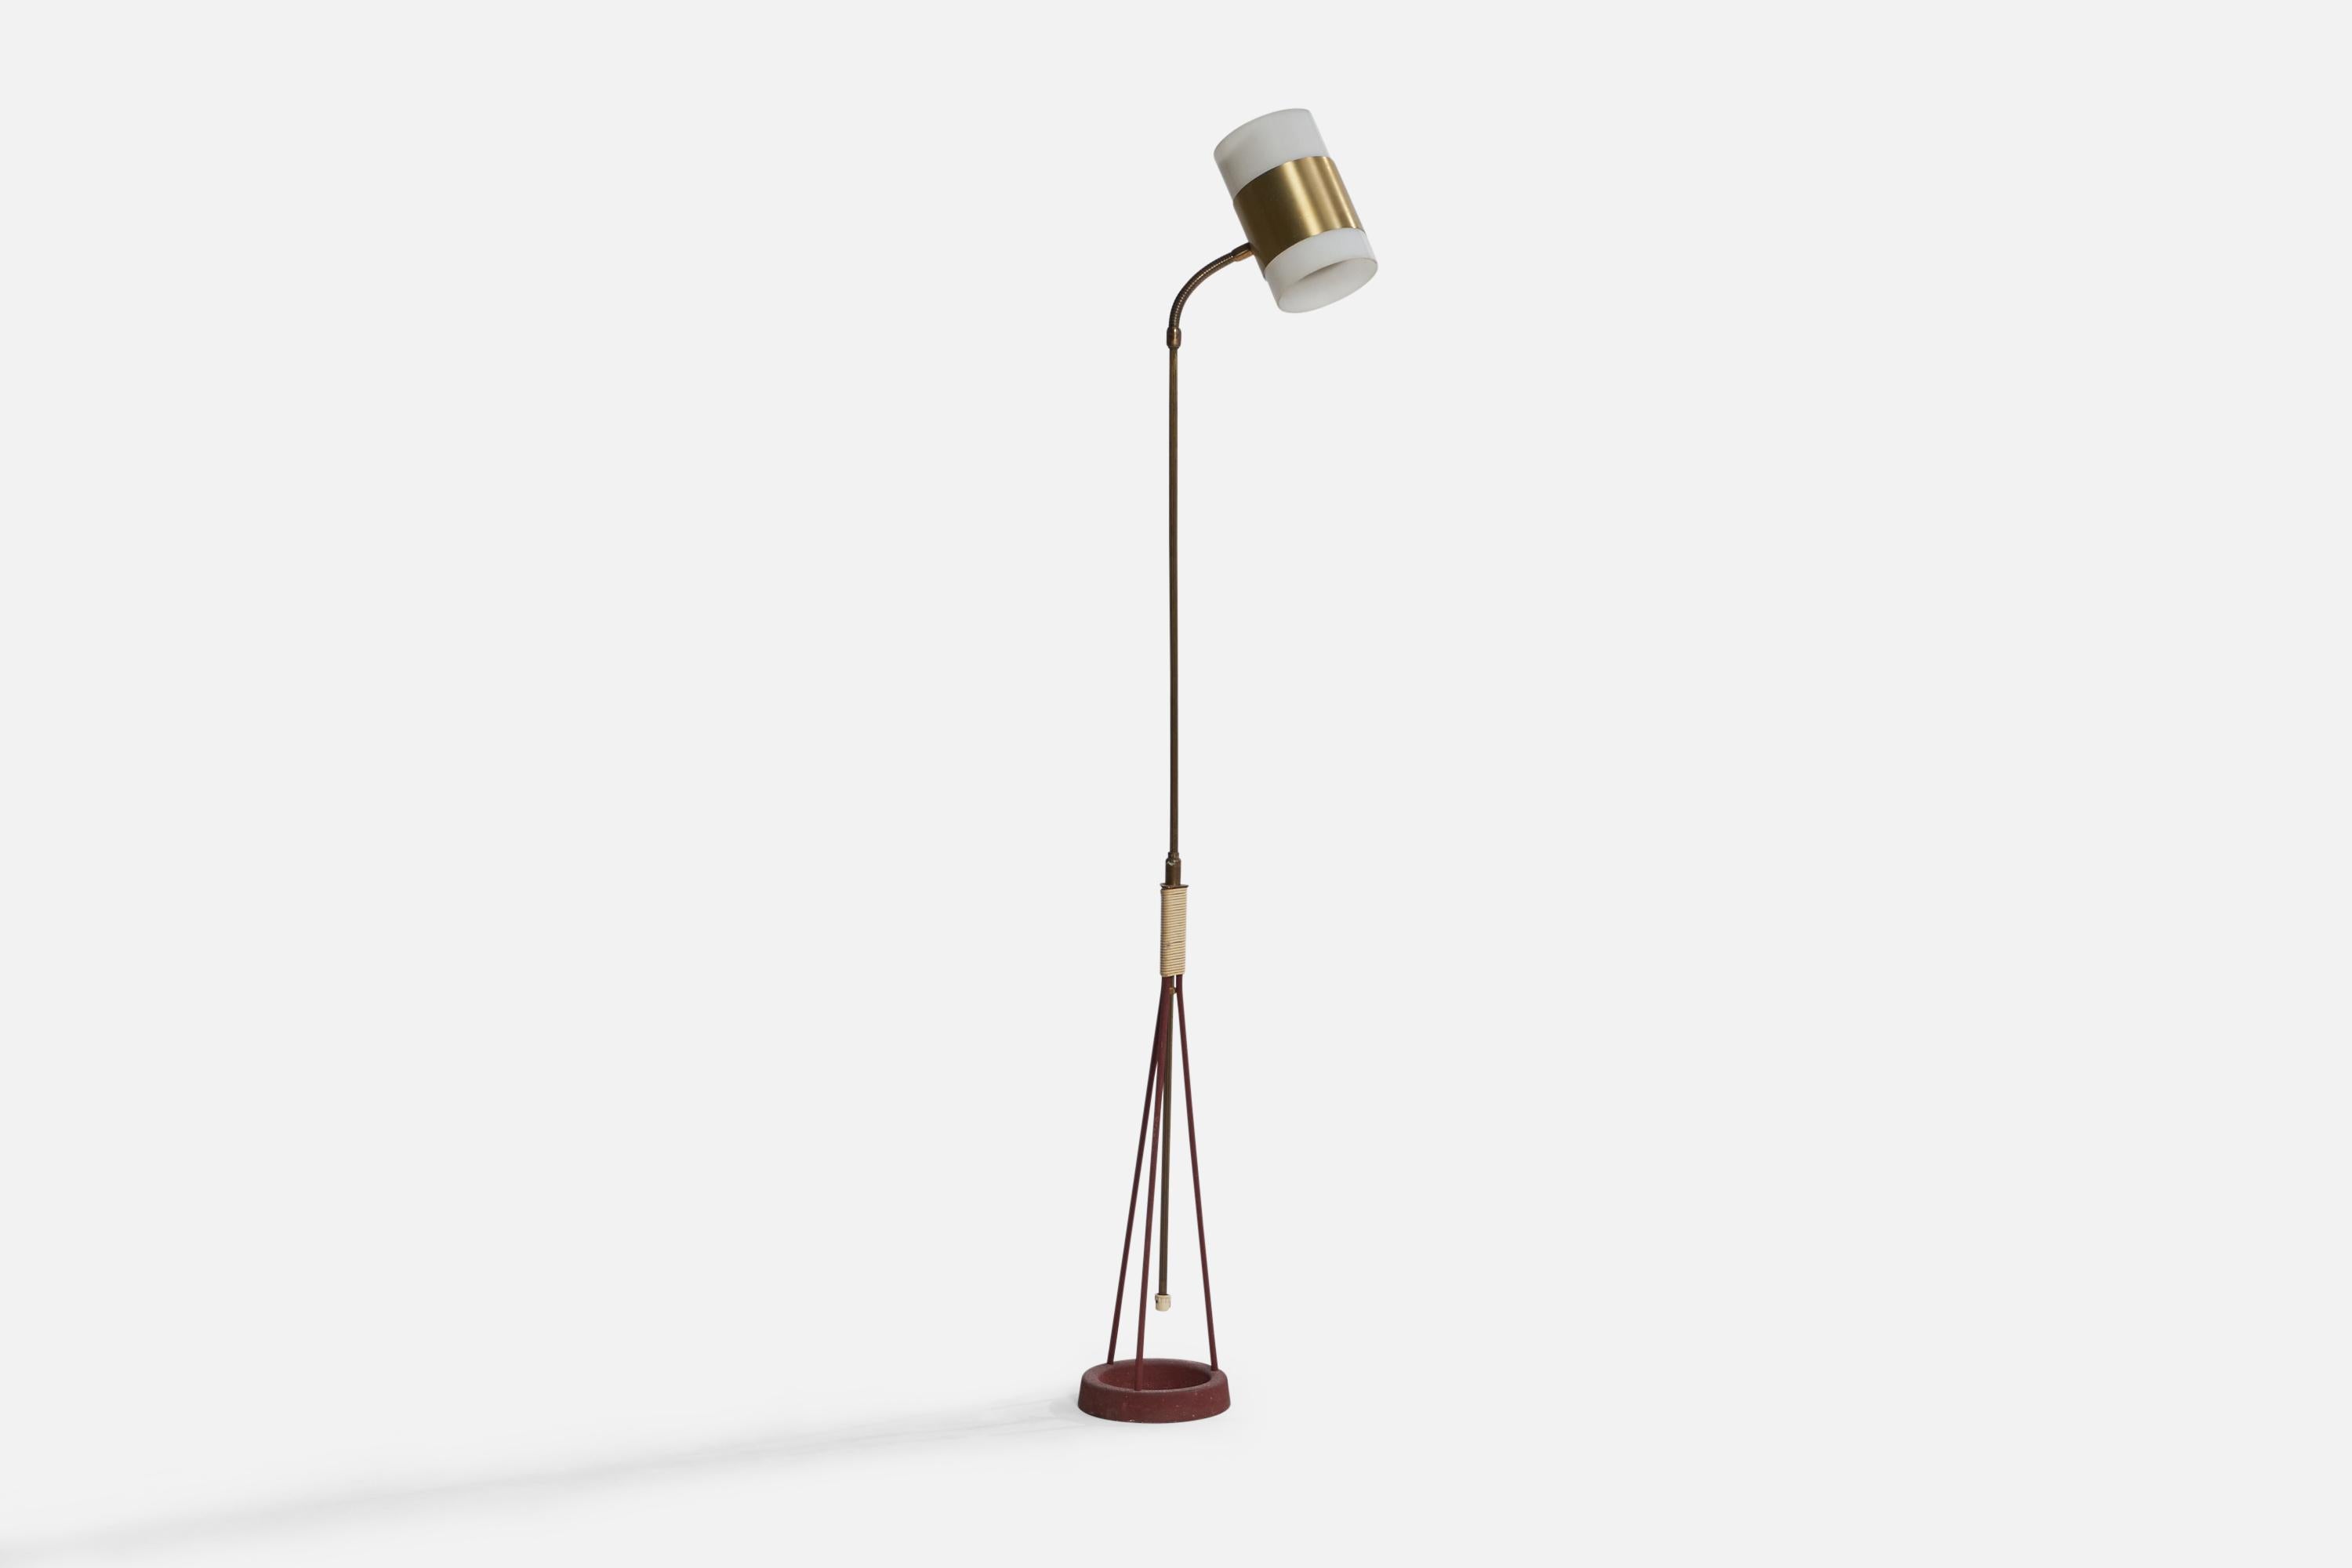 An adjustable brass, acrylic, red-lacquered metal and plastic band floor lamp designed and produced in Sweden, c. 1960s.

Overall Dimensions (inches): 57.25” H x 6.5” Diameter. Stated dimensions include shade.
dimensions adjustable based on position